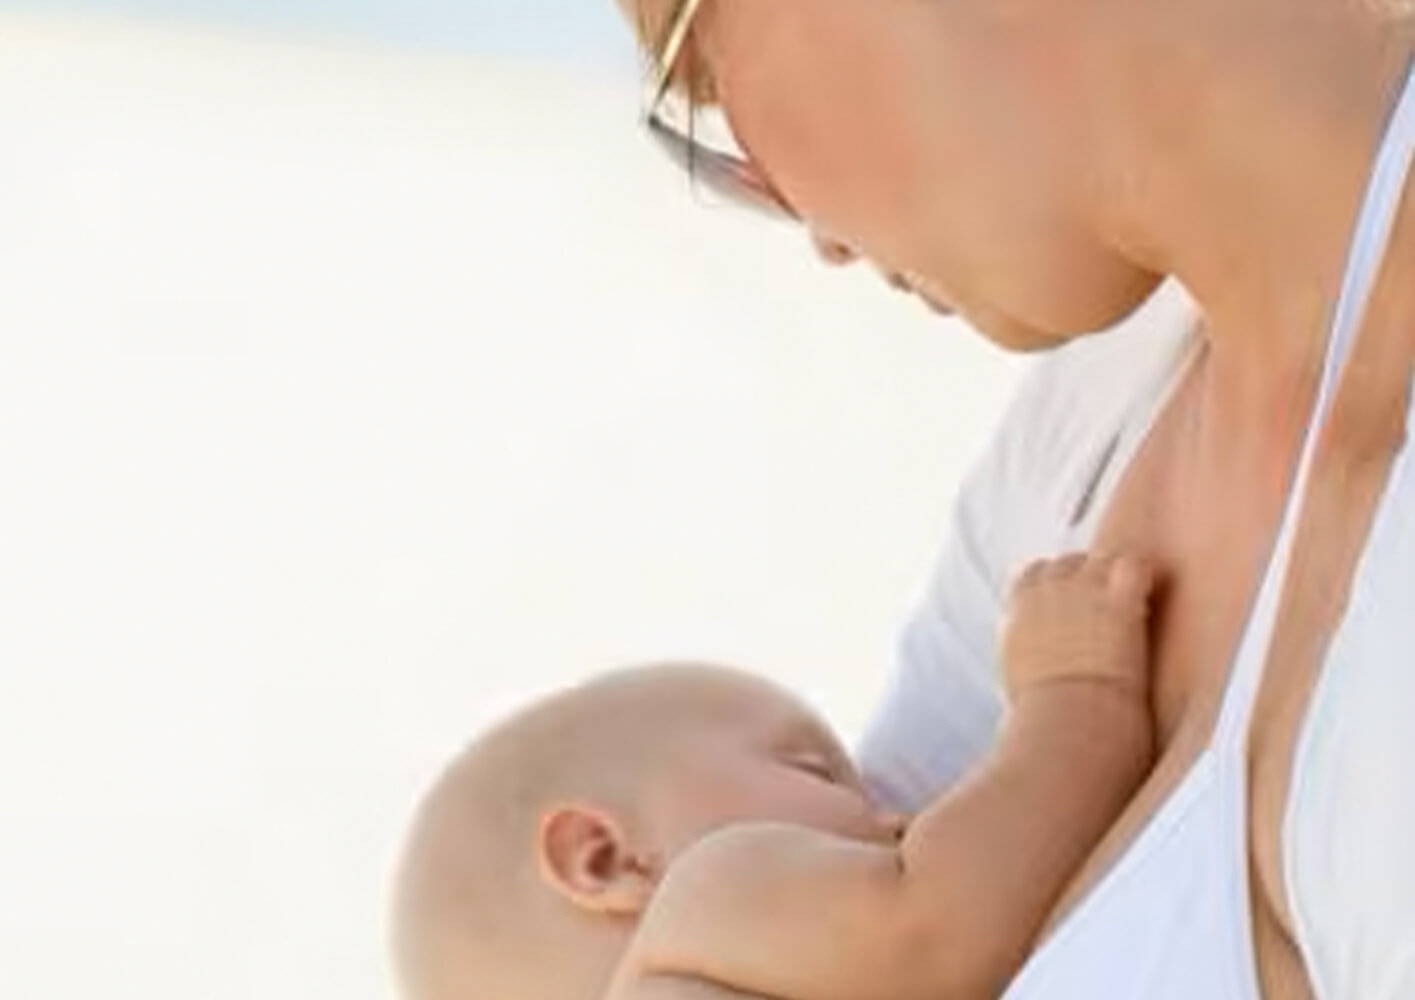 Our Guide To Breastfeeding On Holiday In Europe